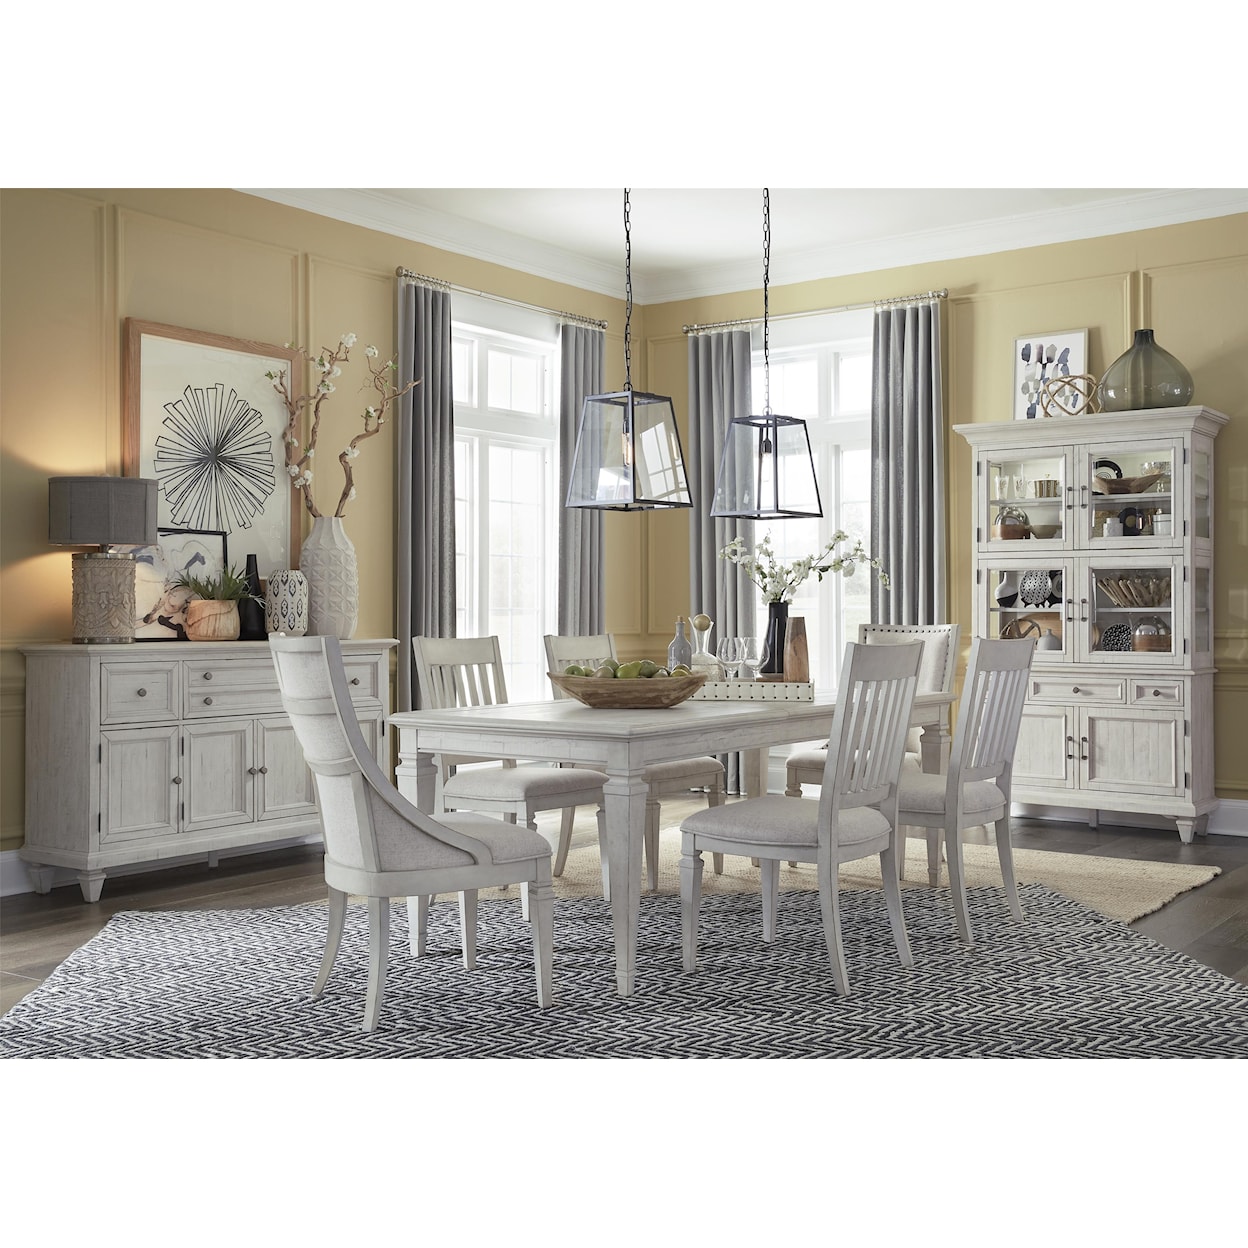 Magnussen Home Newport Dining Room Group 2